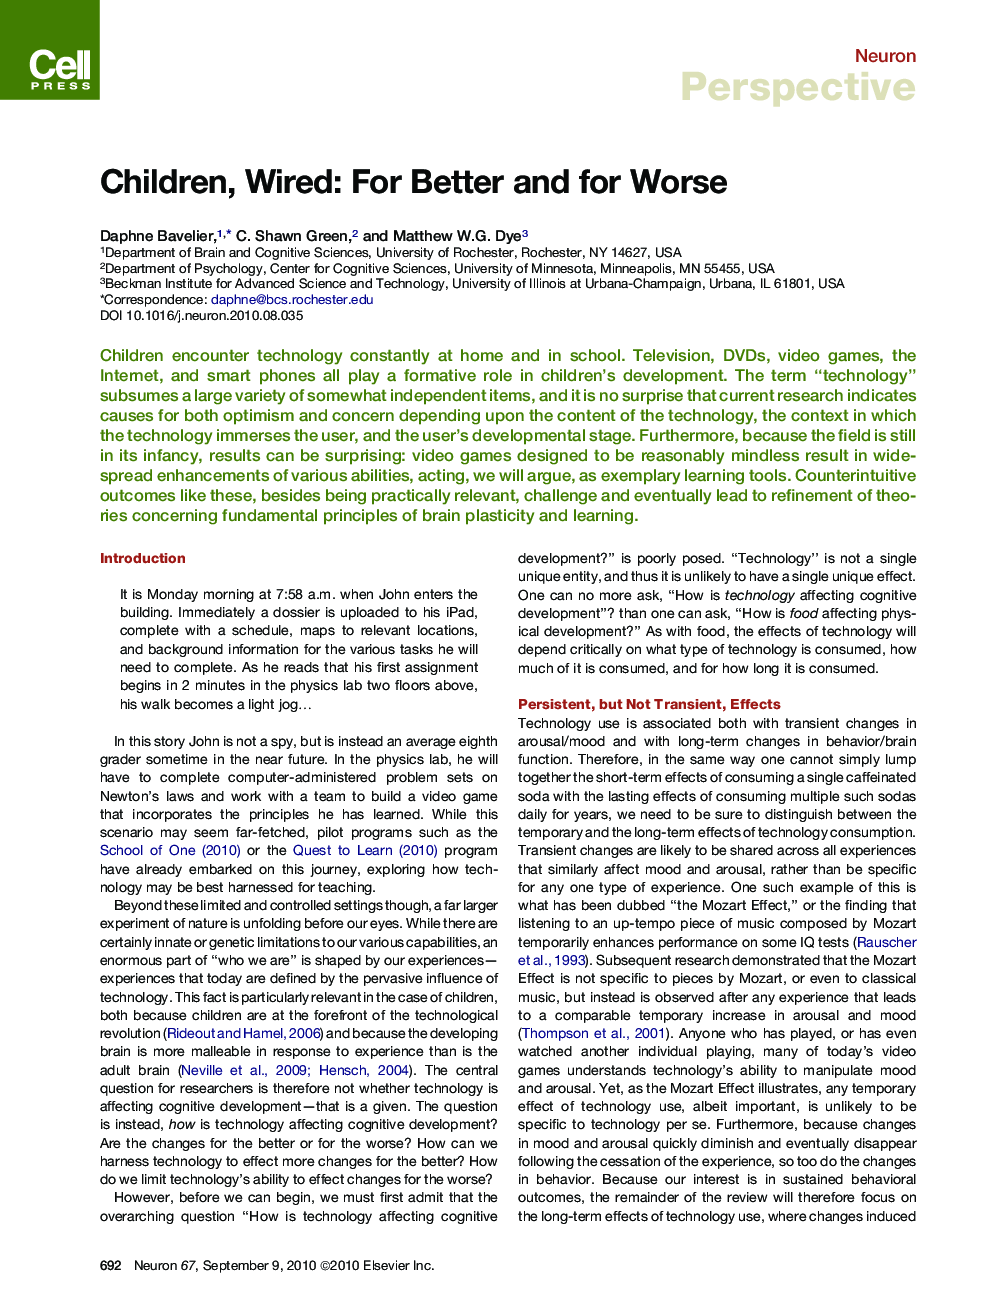 Children, Wired: For Better and for Worse